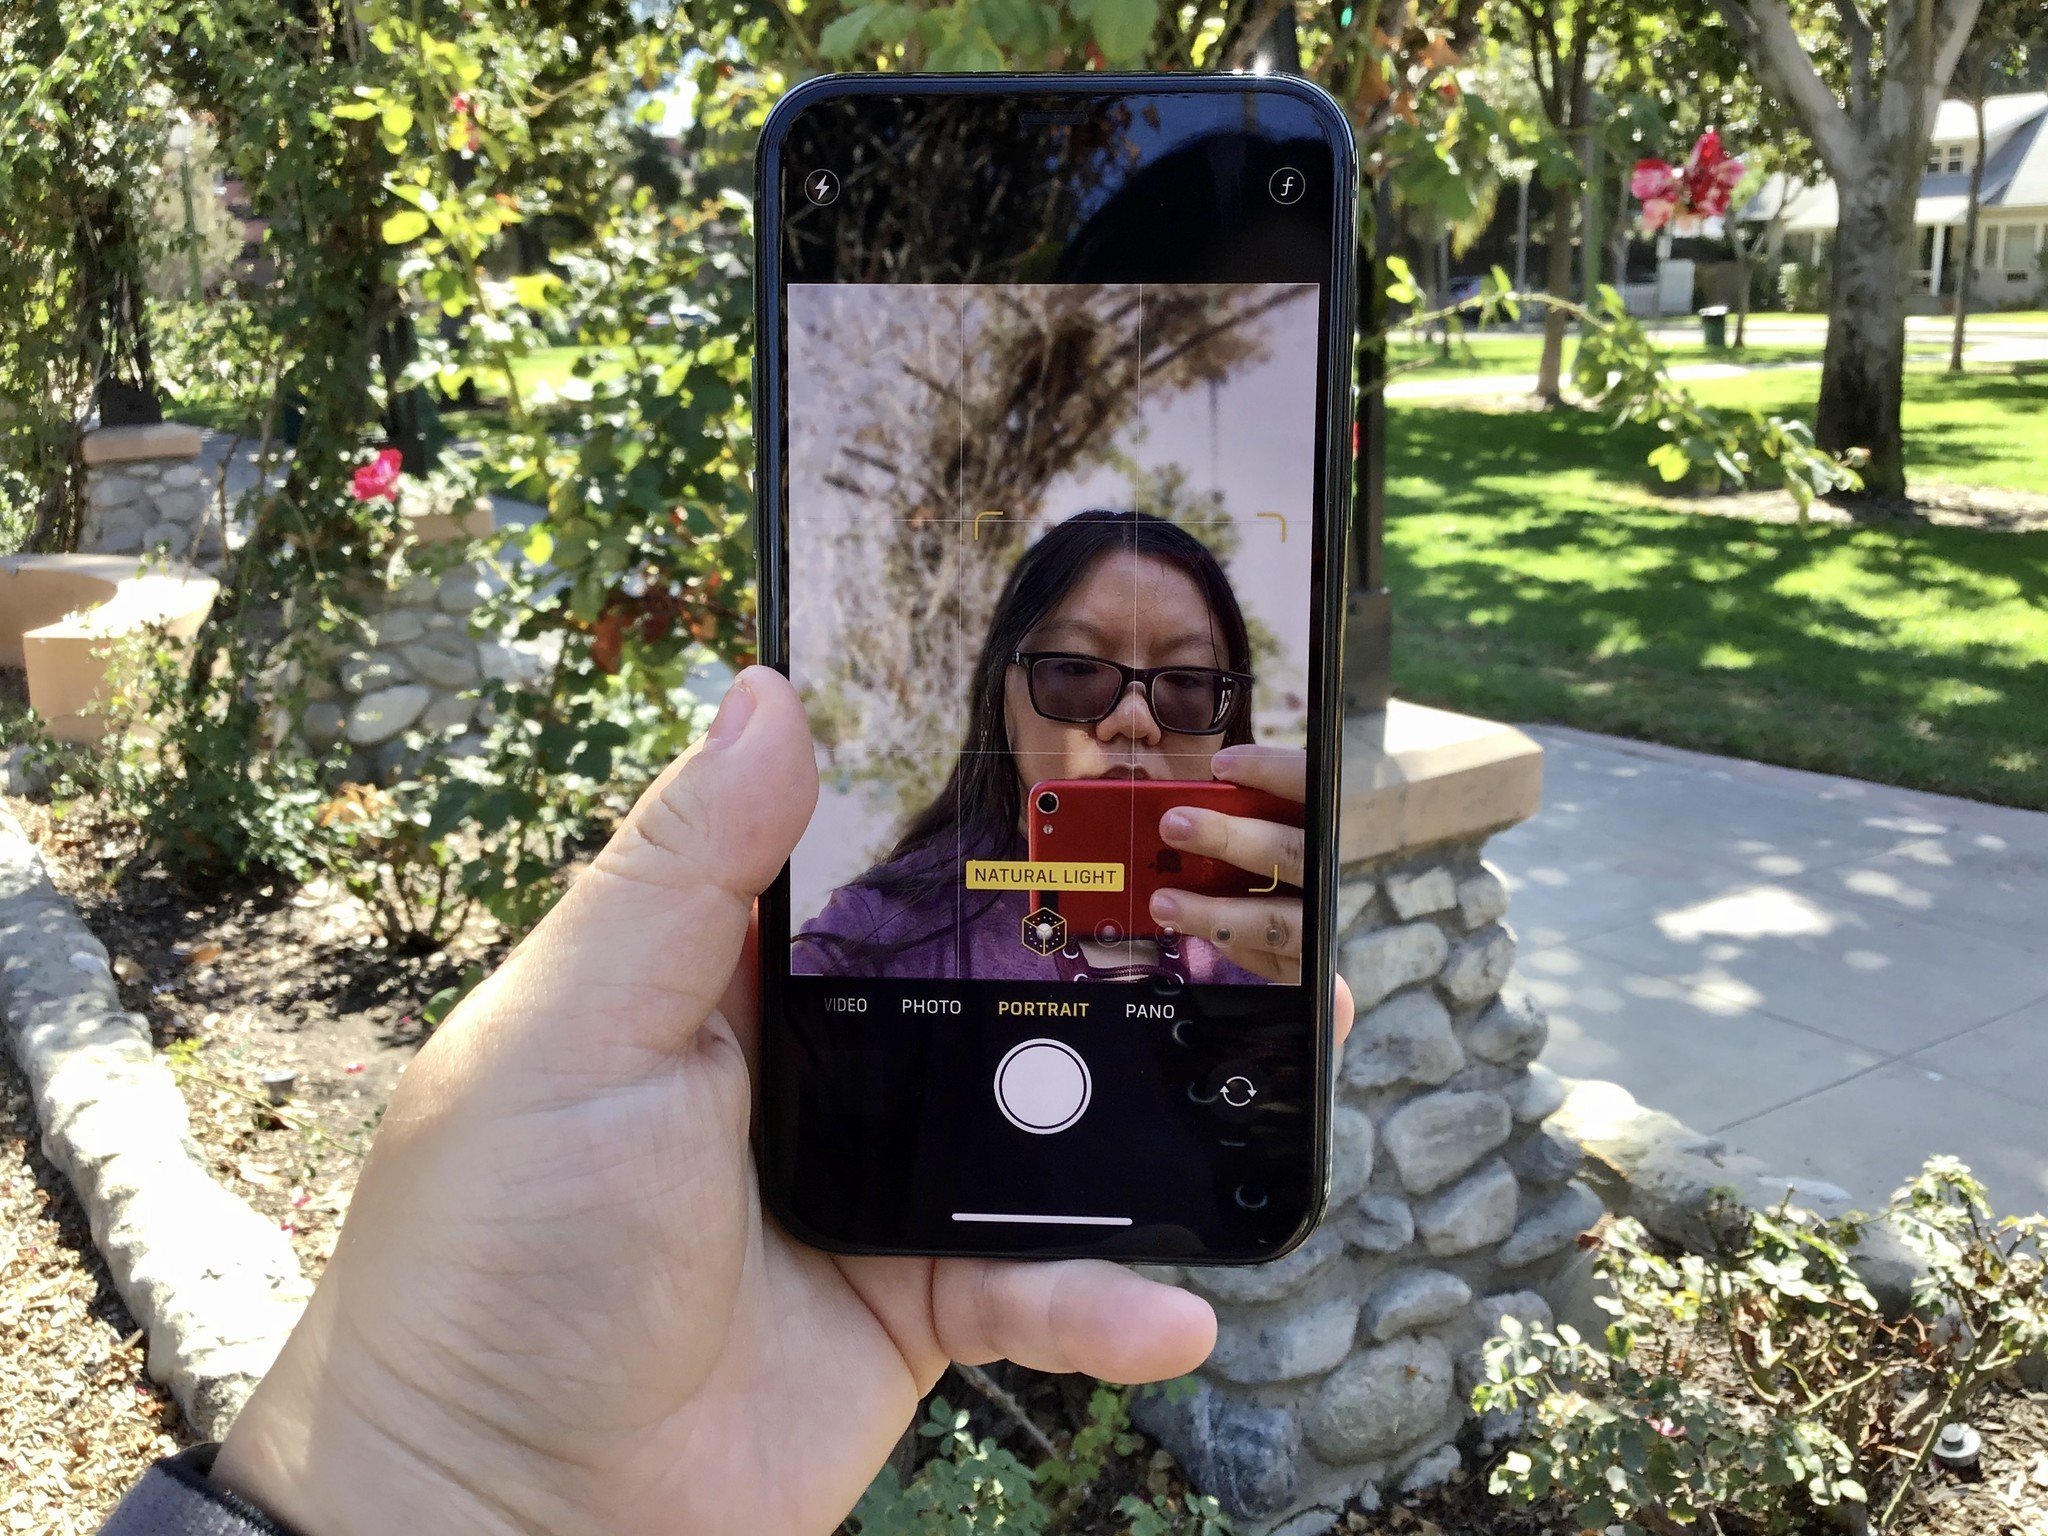 trække sig tilbage fejre syv How to take photos, selfies, bursts, and more with your iPhone or iPad |  iMore